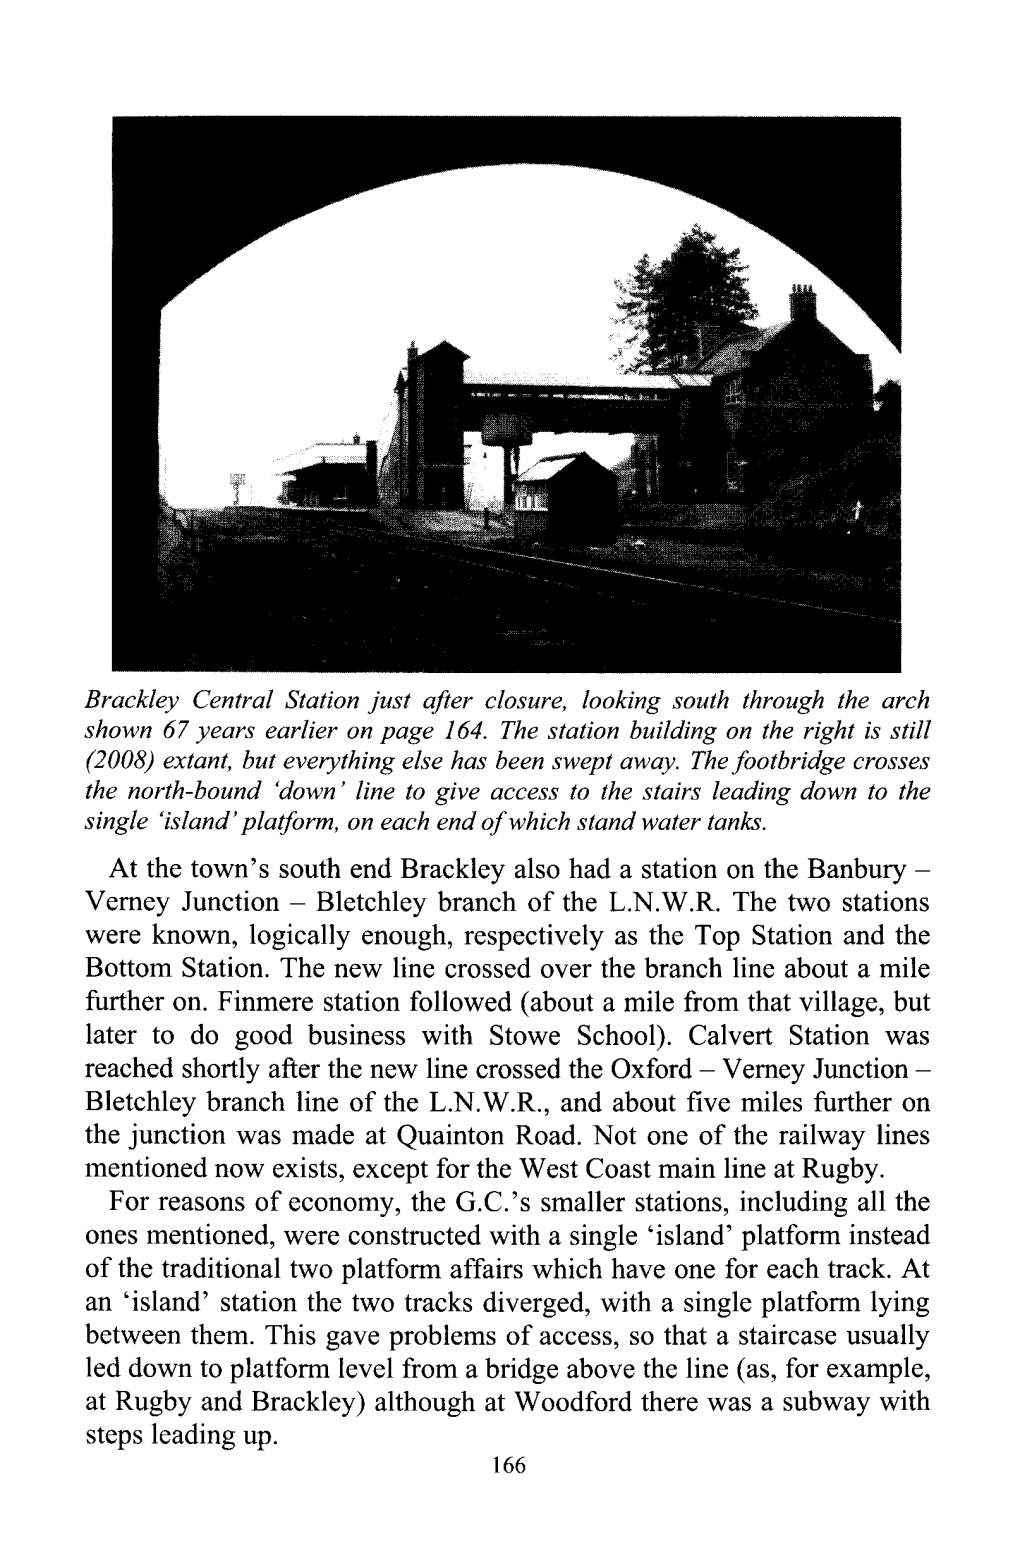 Verney Junction — Bletchley Branch of the L.N.W.R